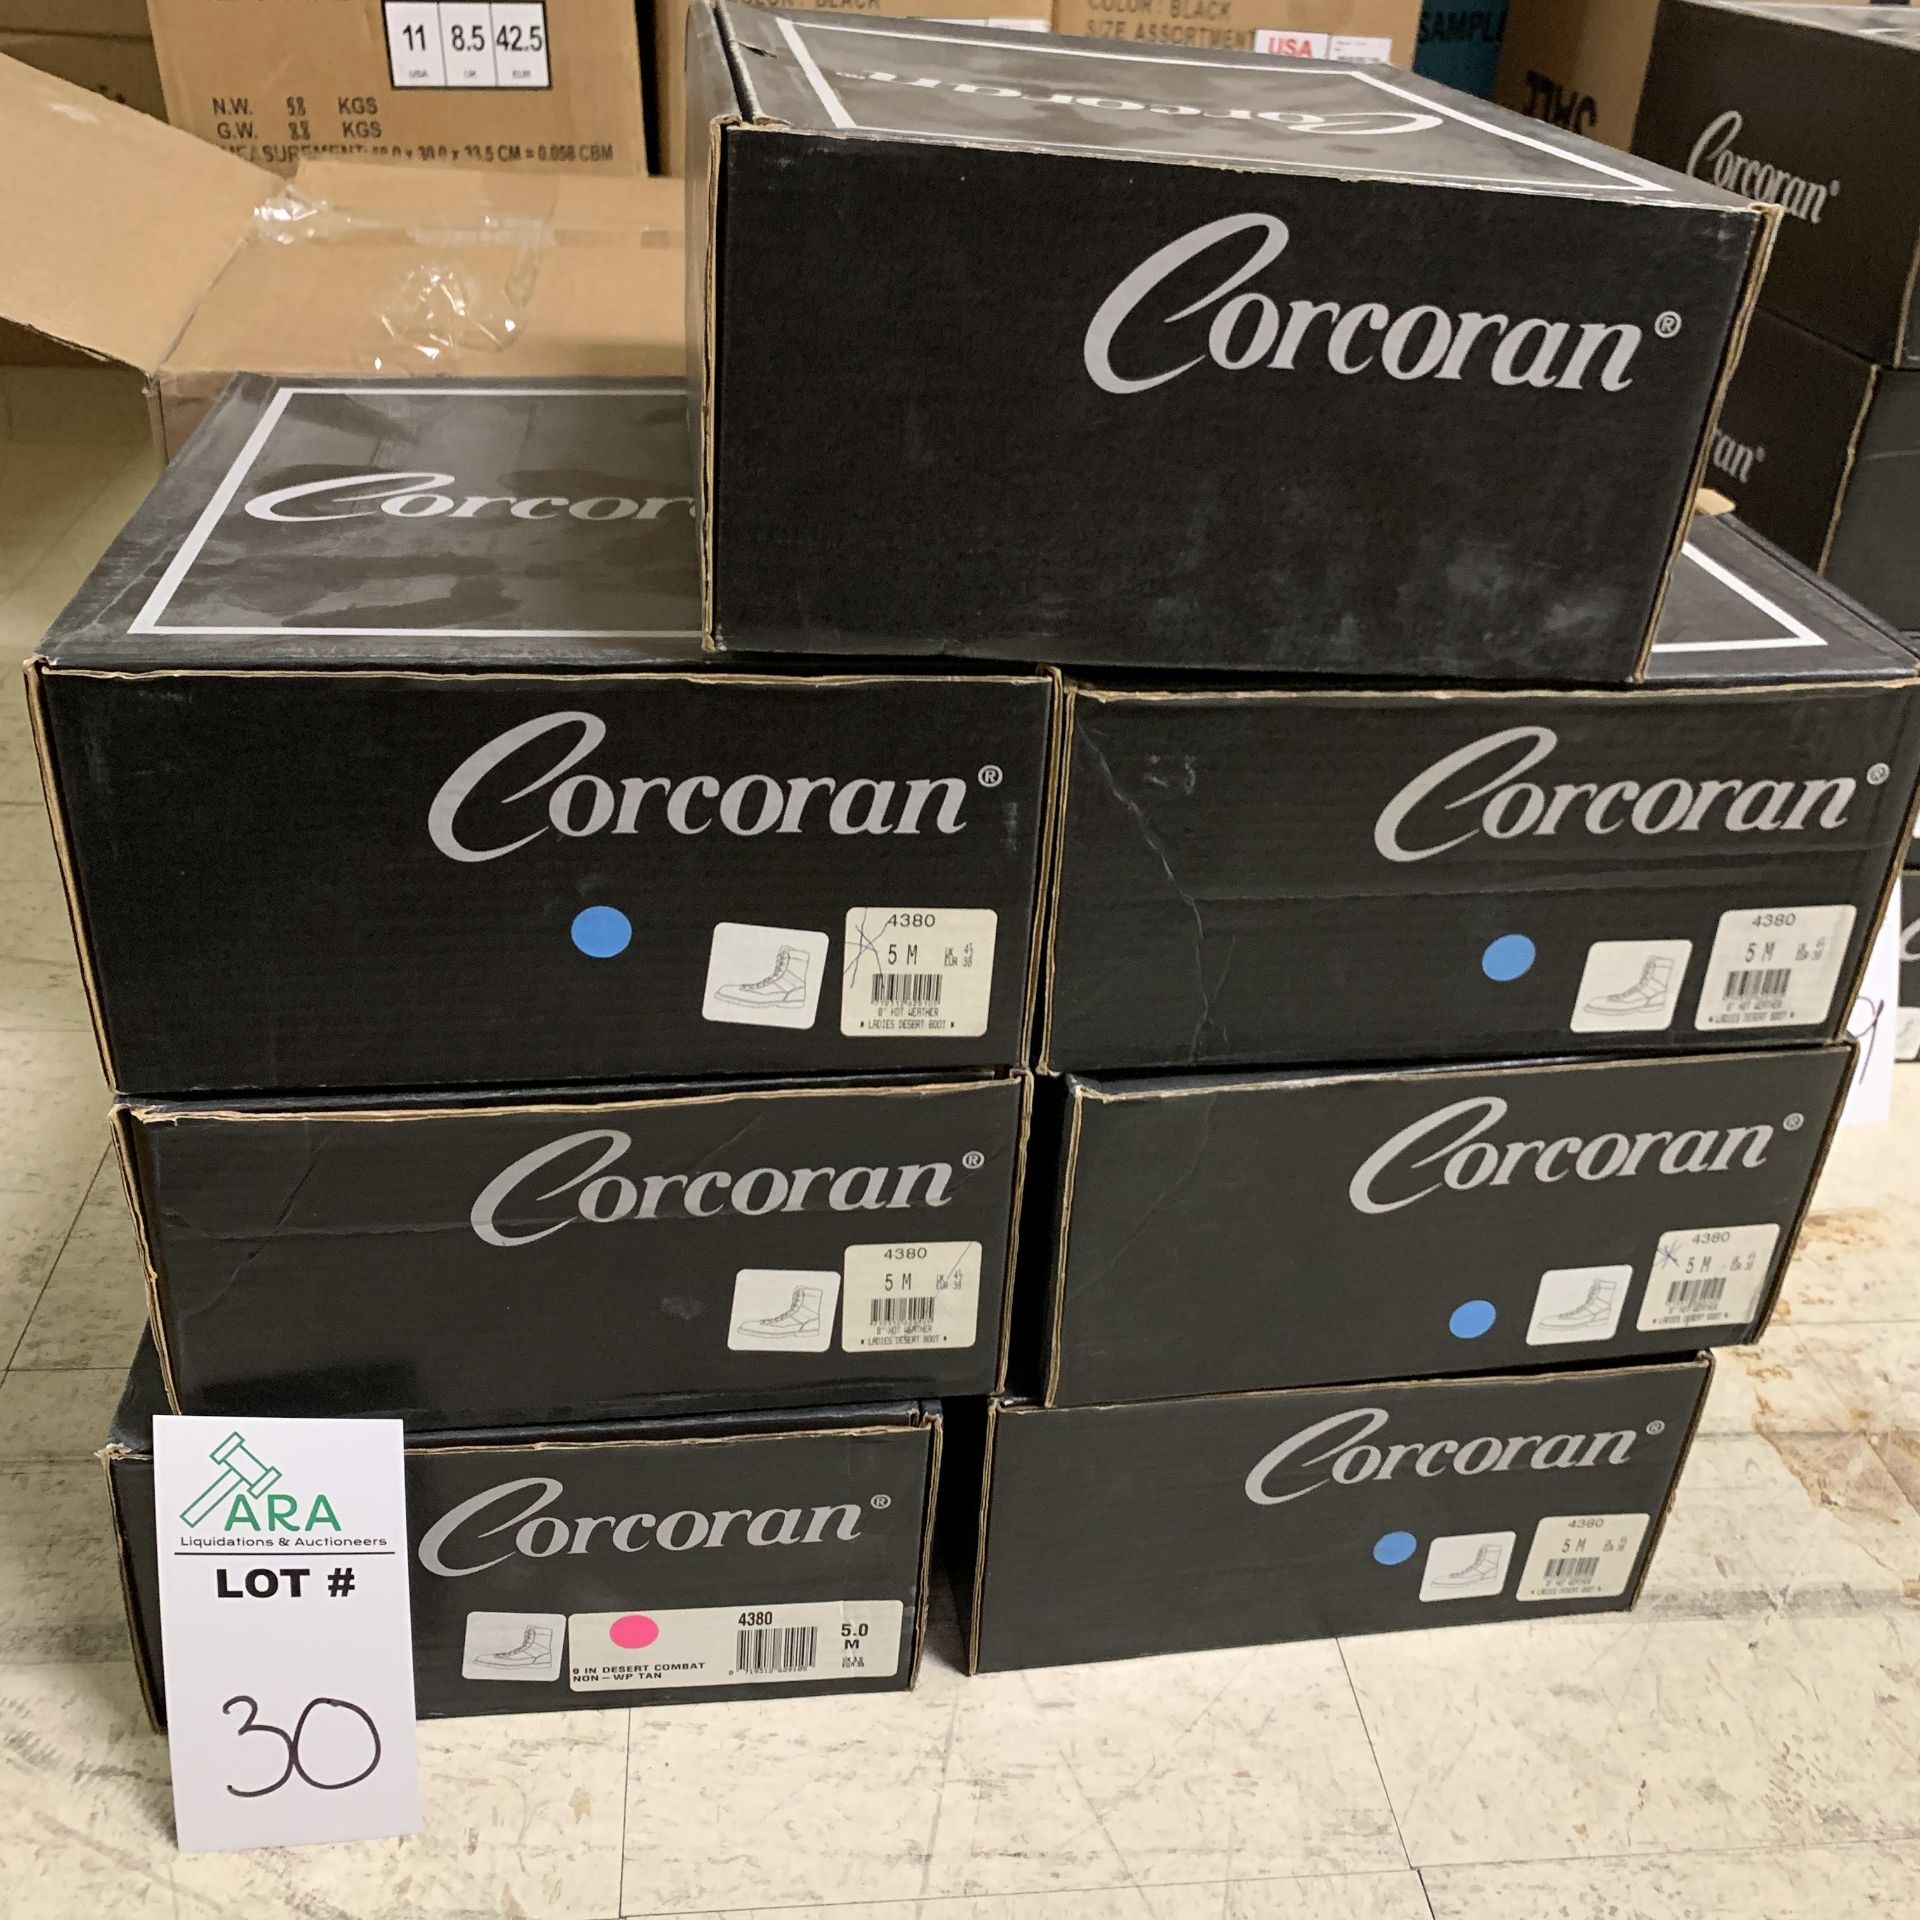 7 Pairs of Corcoran Desert Combat Boots, Tan 4380, Various Sizes, New in Box, Retail $350++